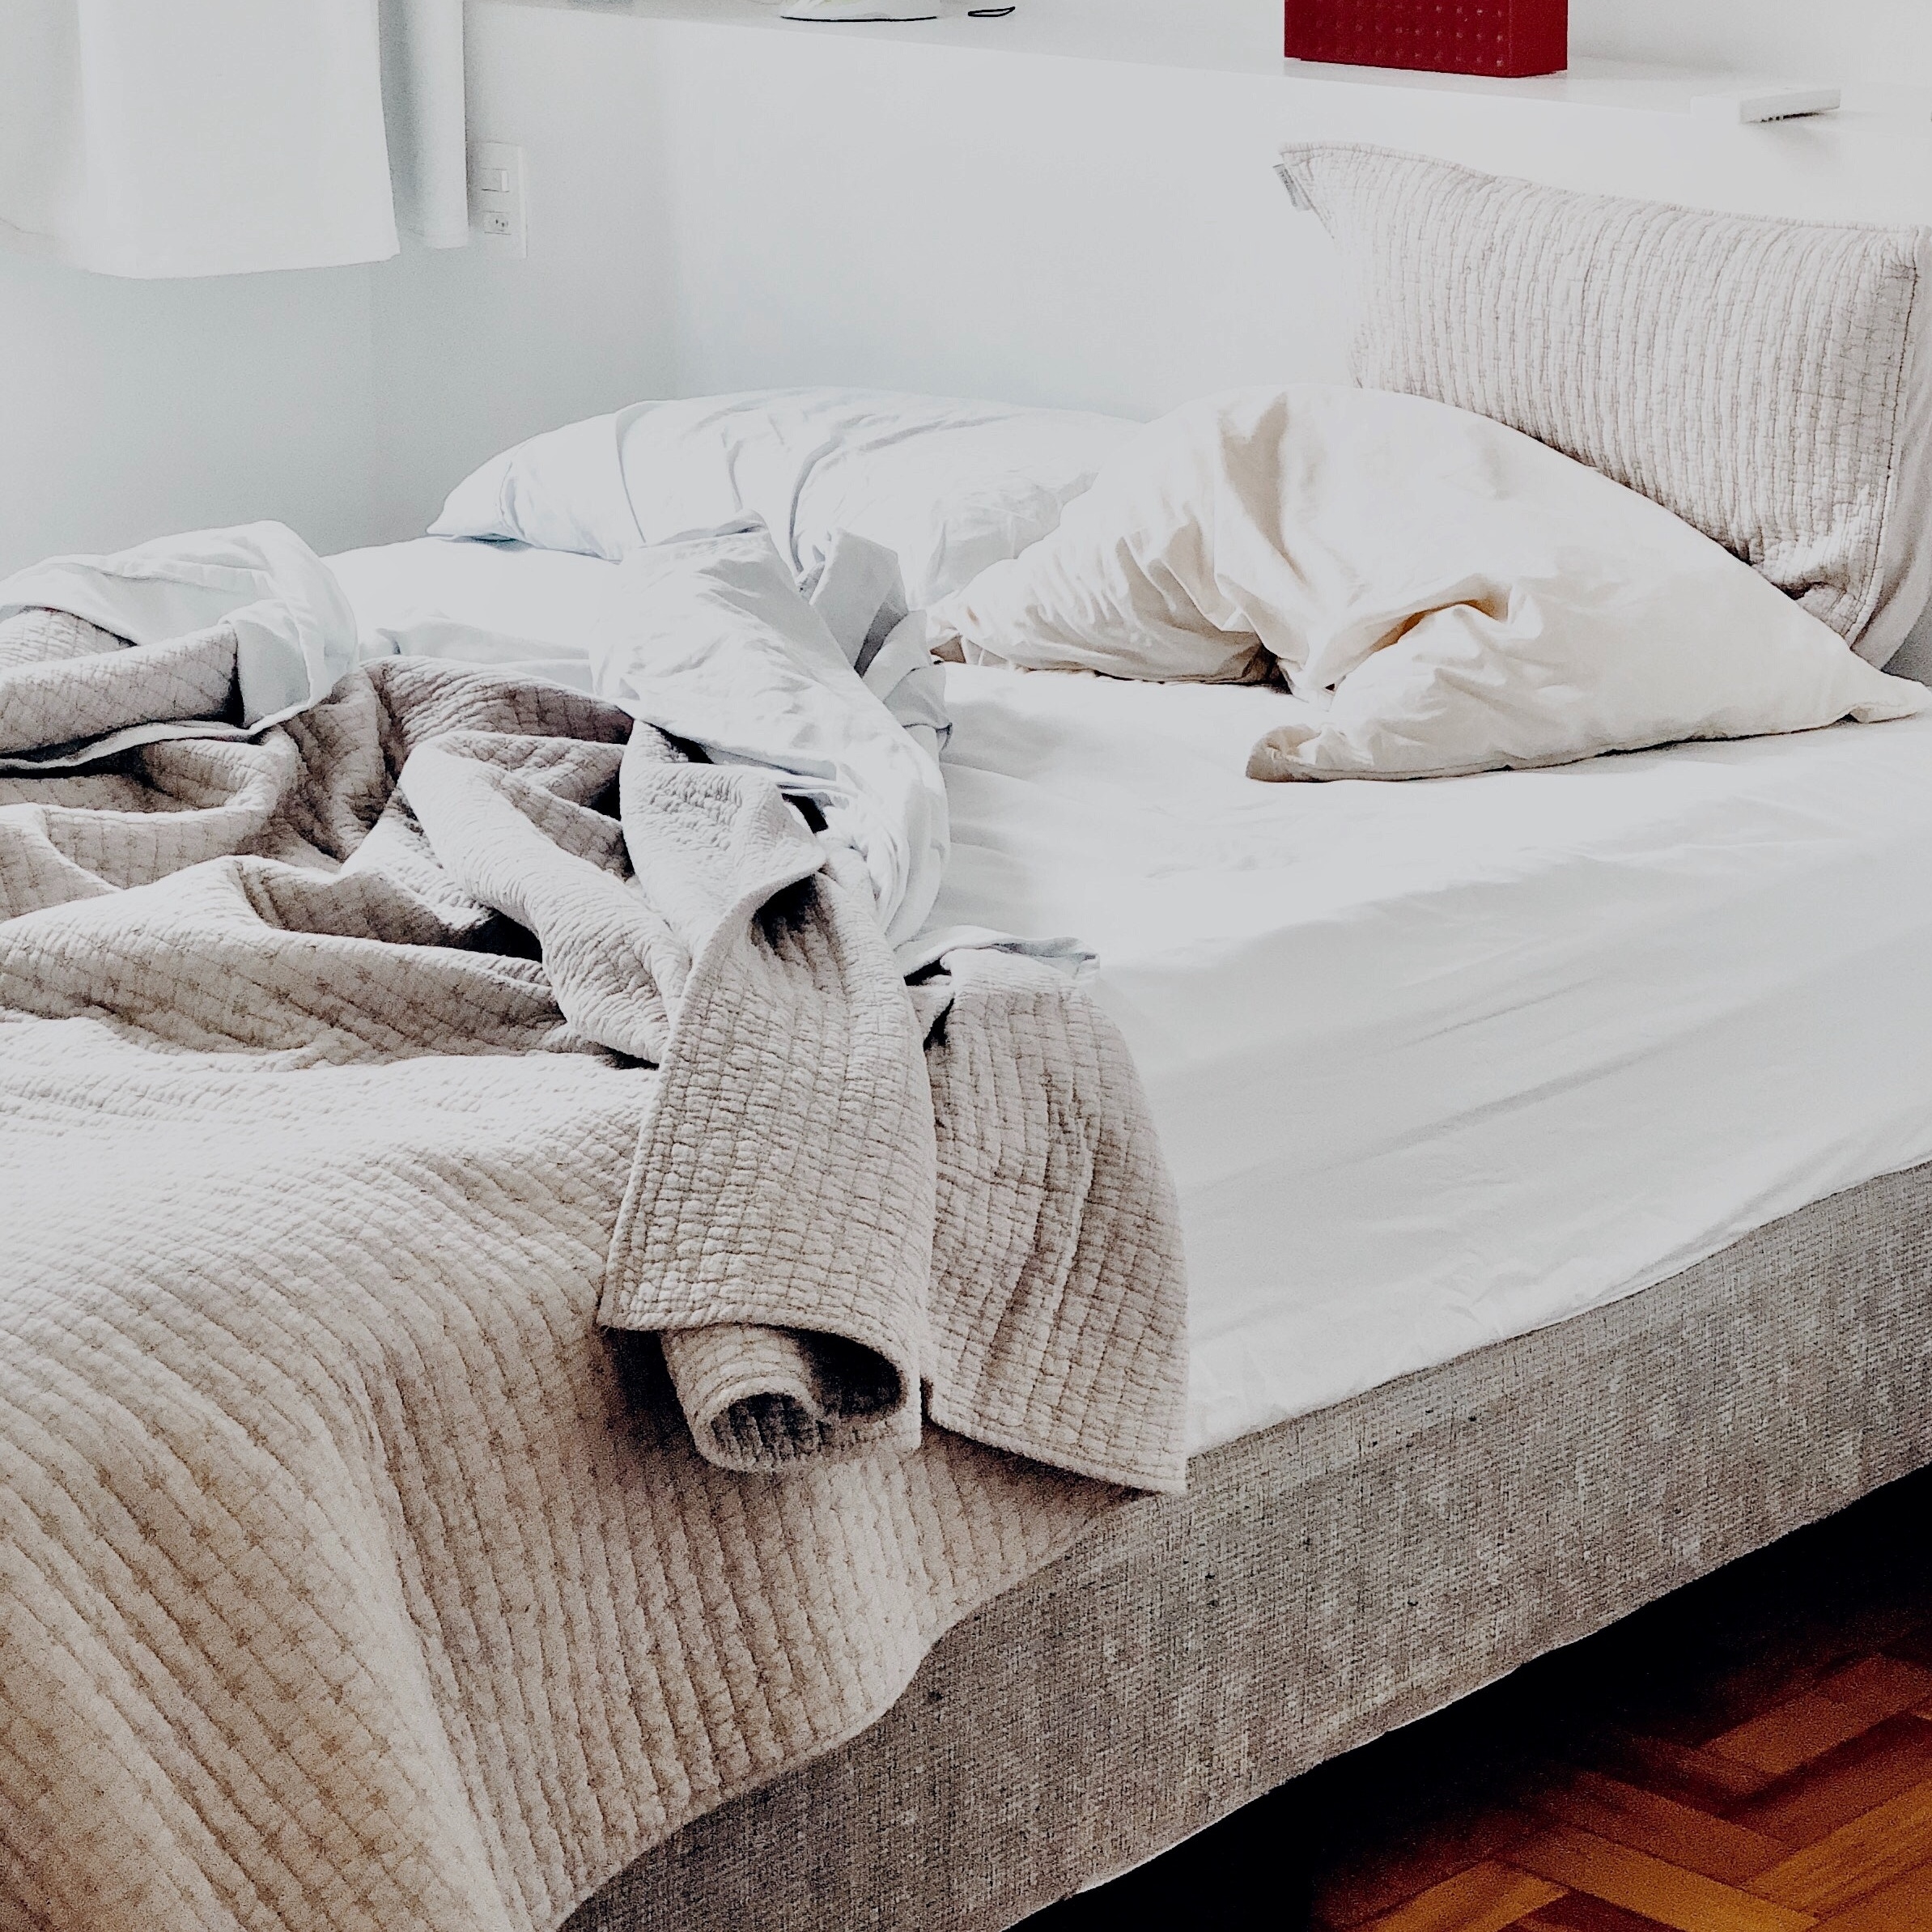 A Guide to the Best Mattresses in the UK | Advice + Reviews